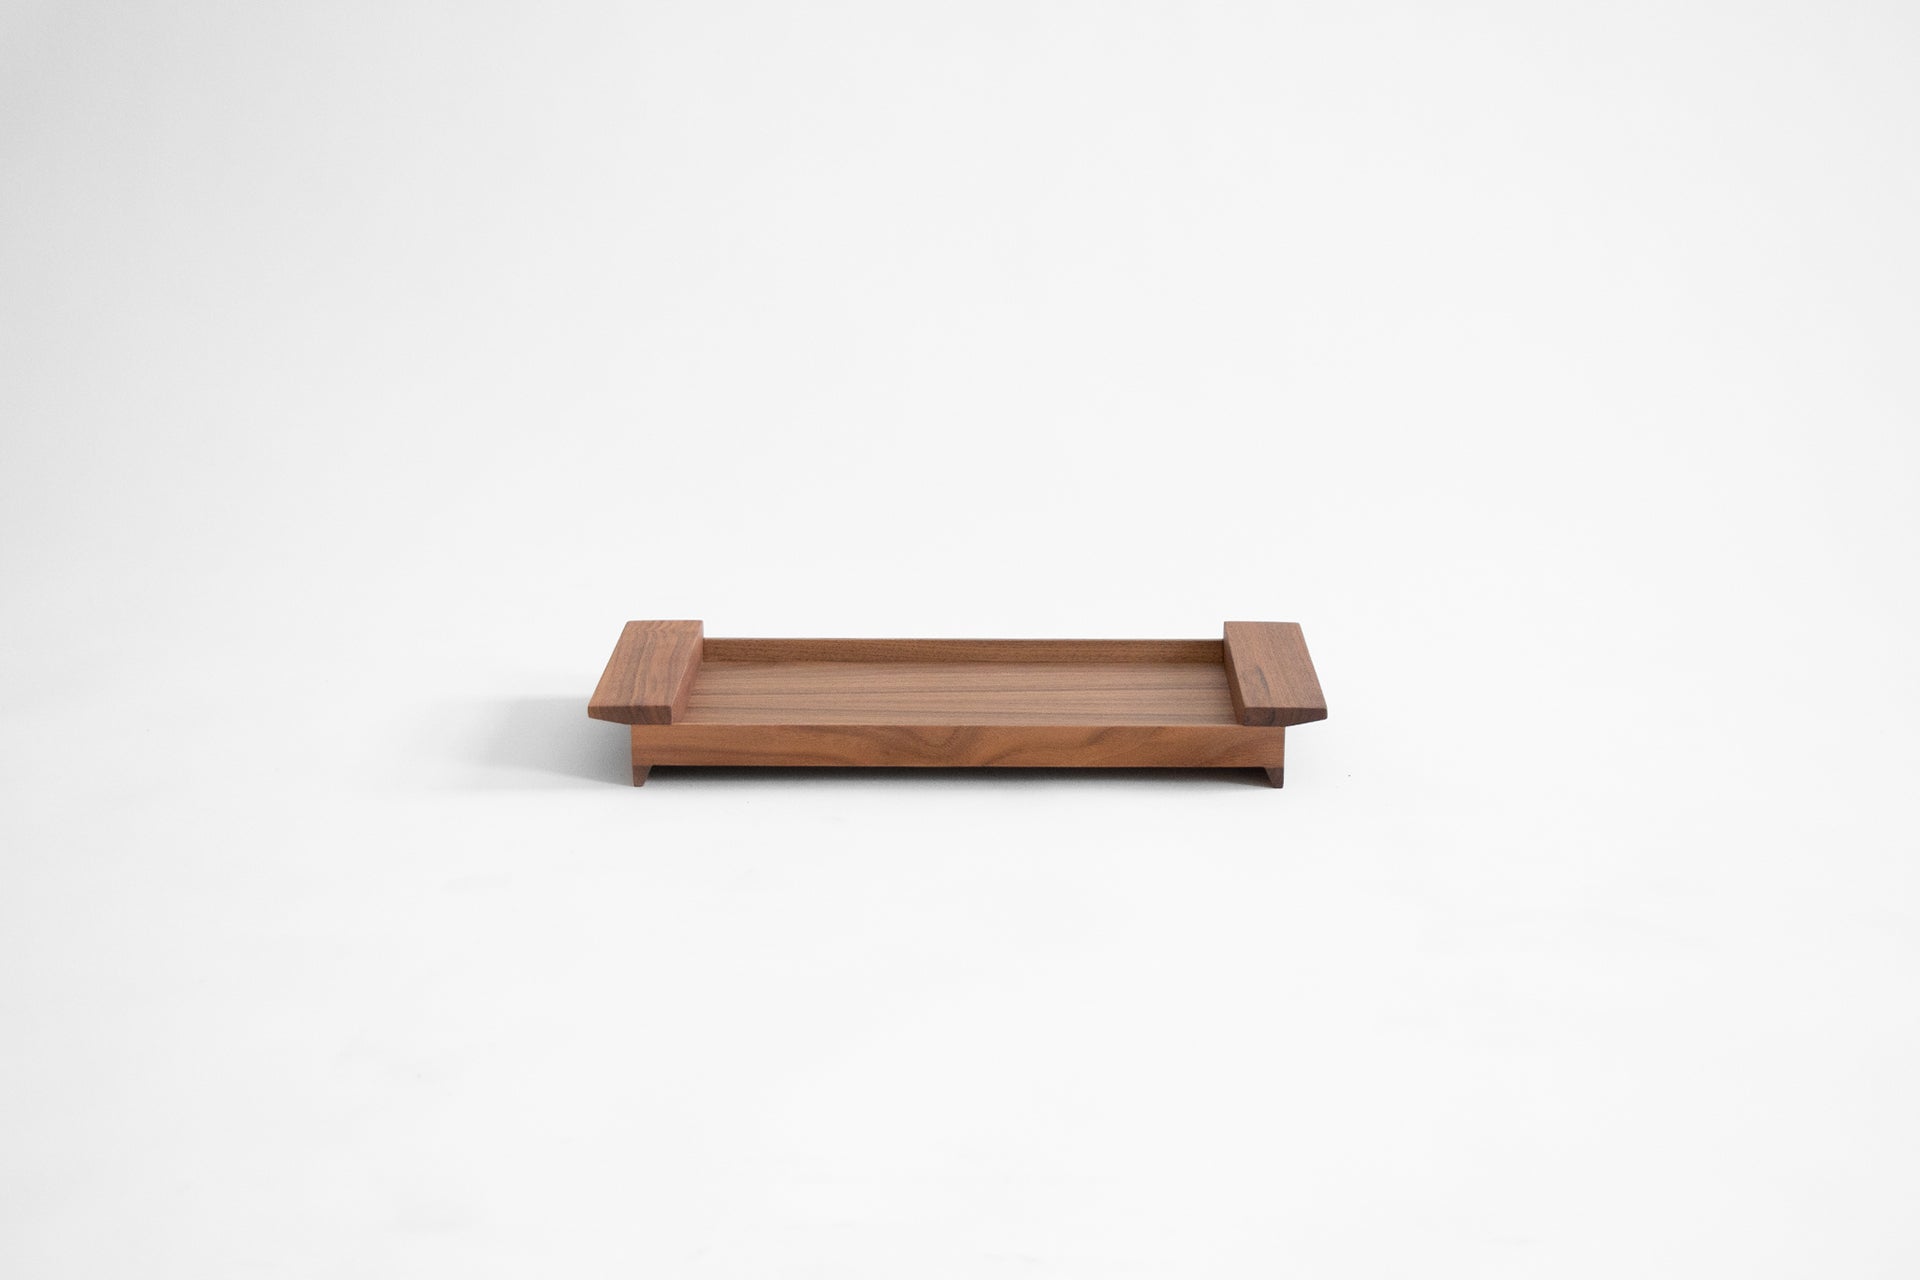 Ponte Tray Small in Walnut Handcrafted in Portugal by Origin Made